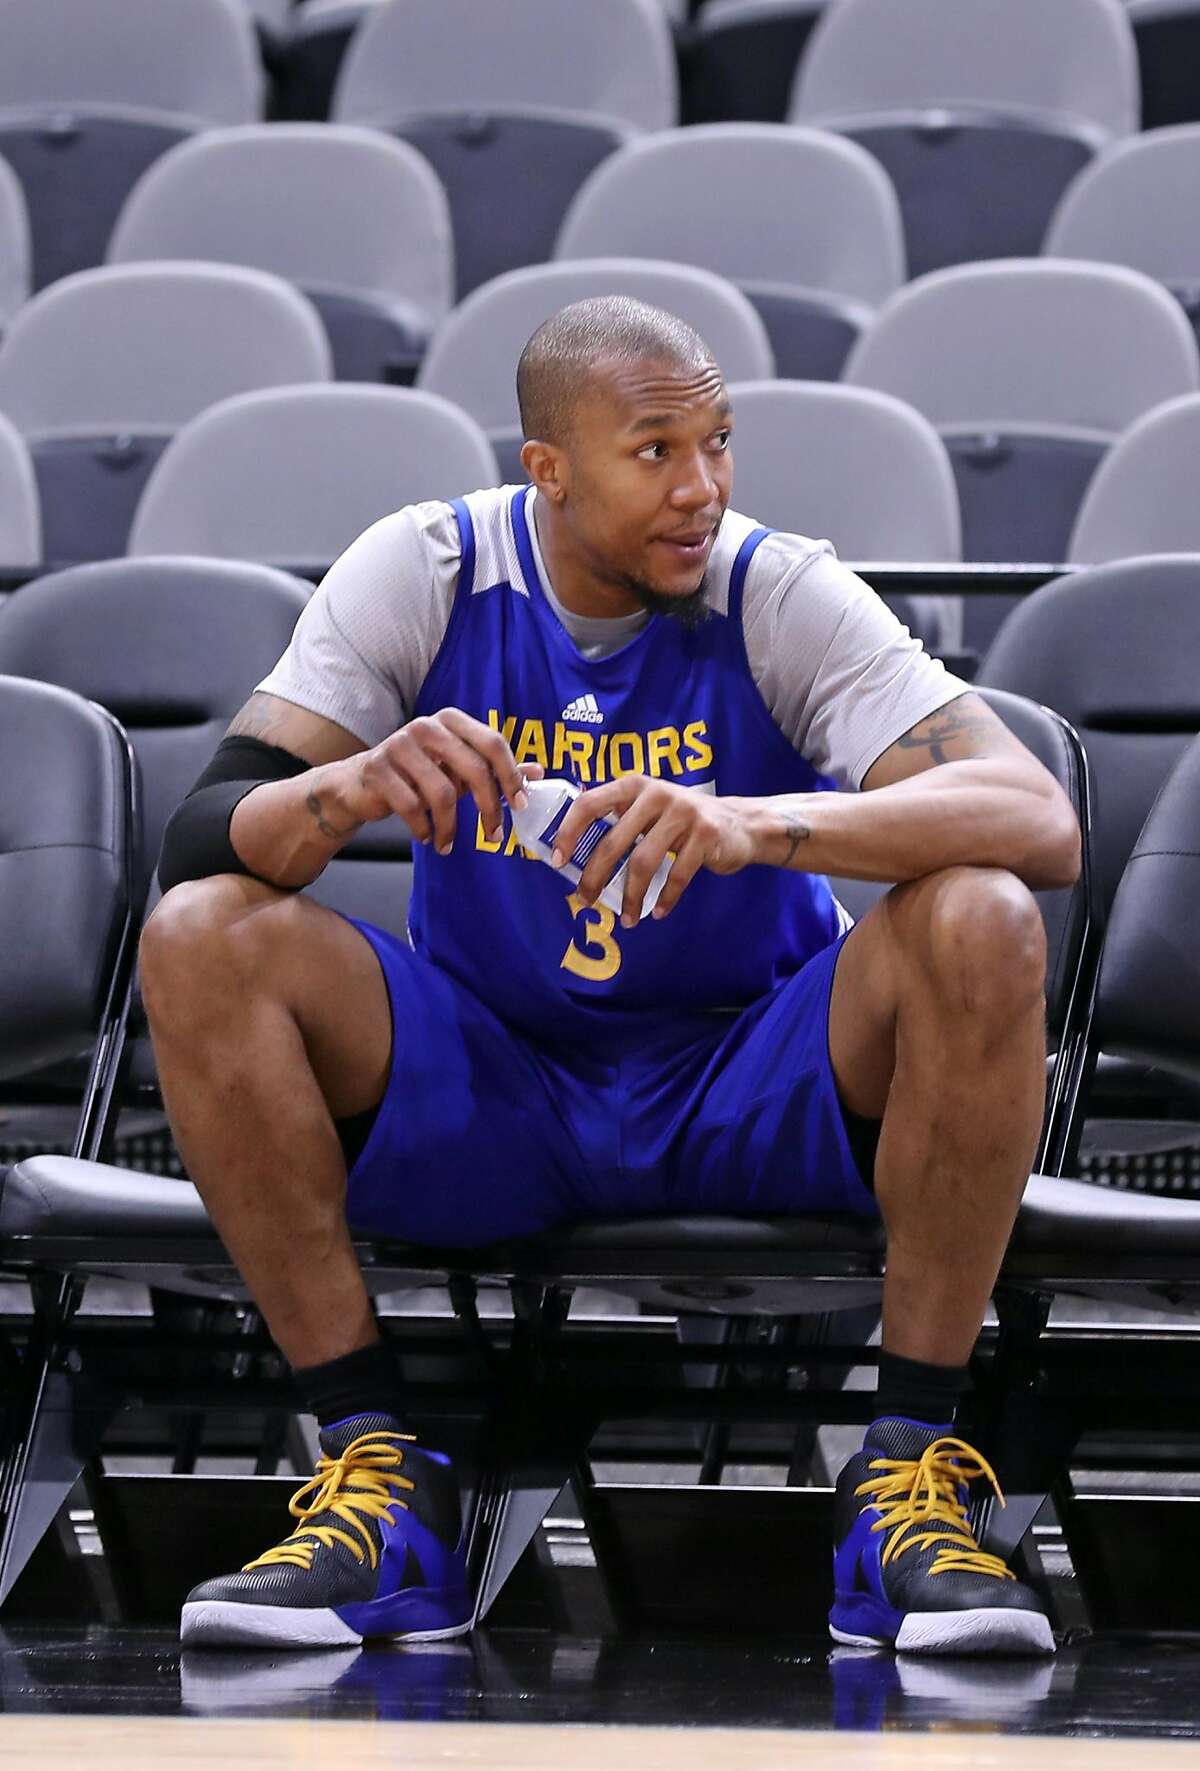 Golden State Warriors' David West after practice during NBA Western Conference Finals at AT&T Center in San Antonio, Texas, on Sunday, May 21, 2017.